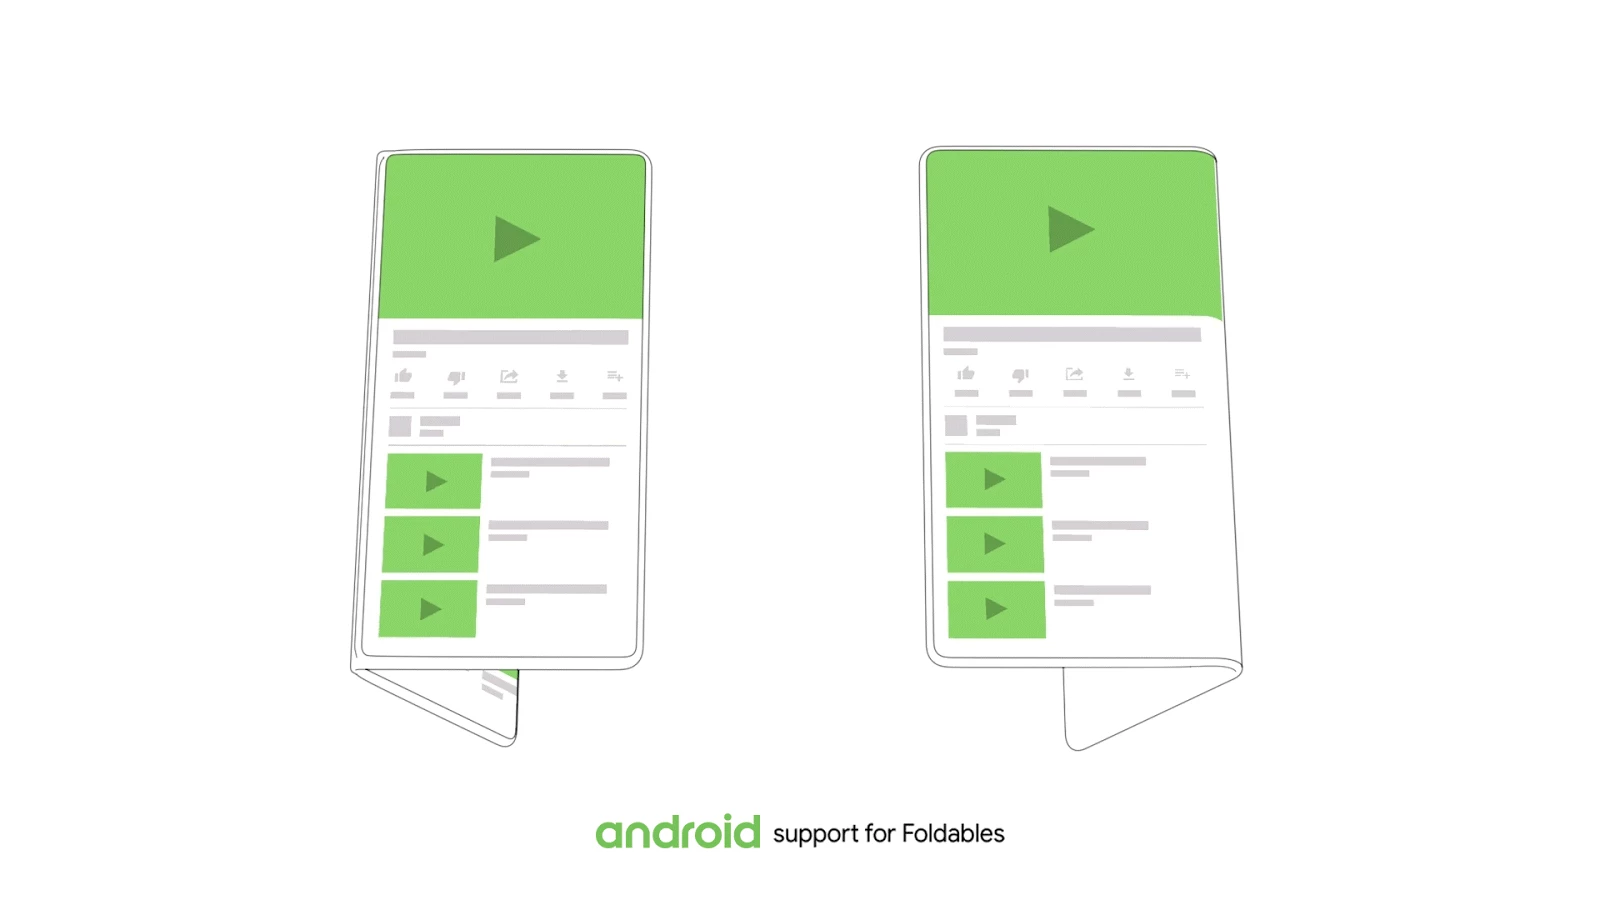 Android support for foldables.